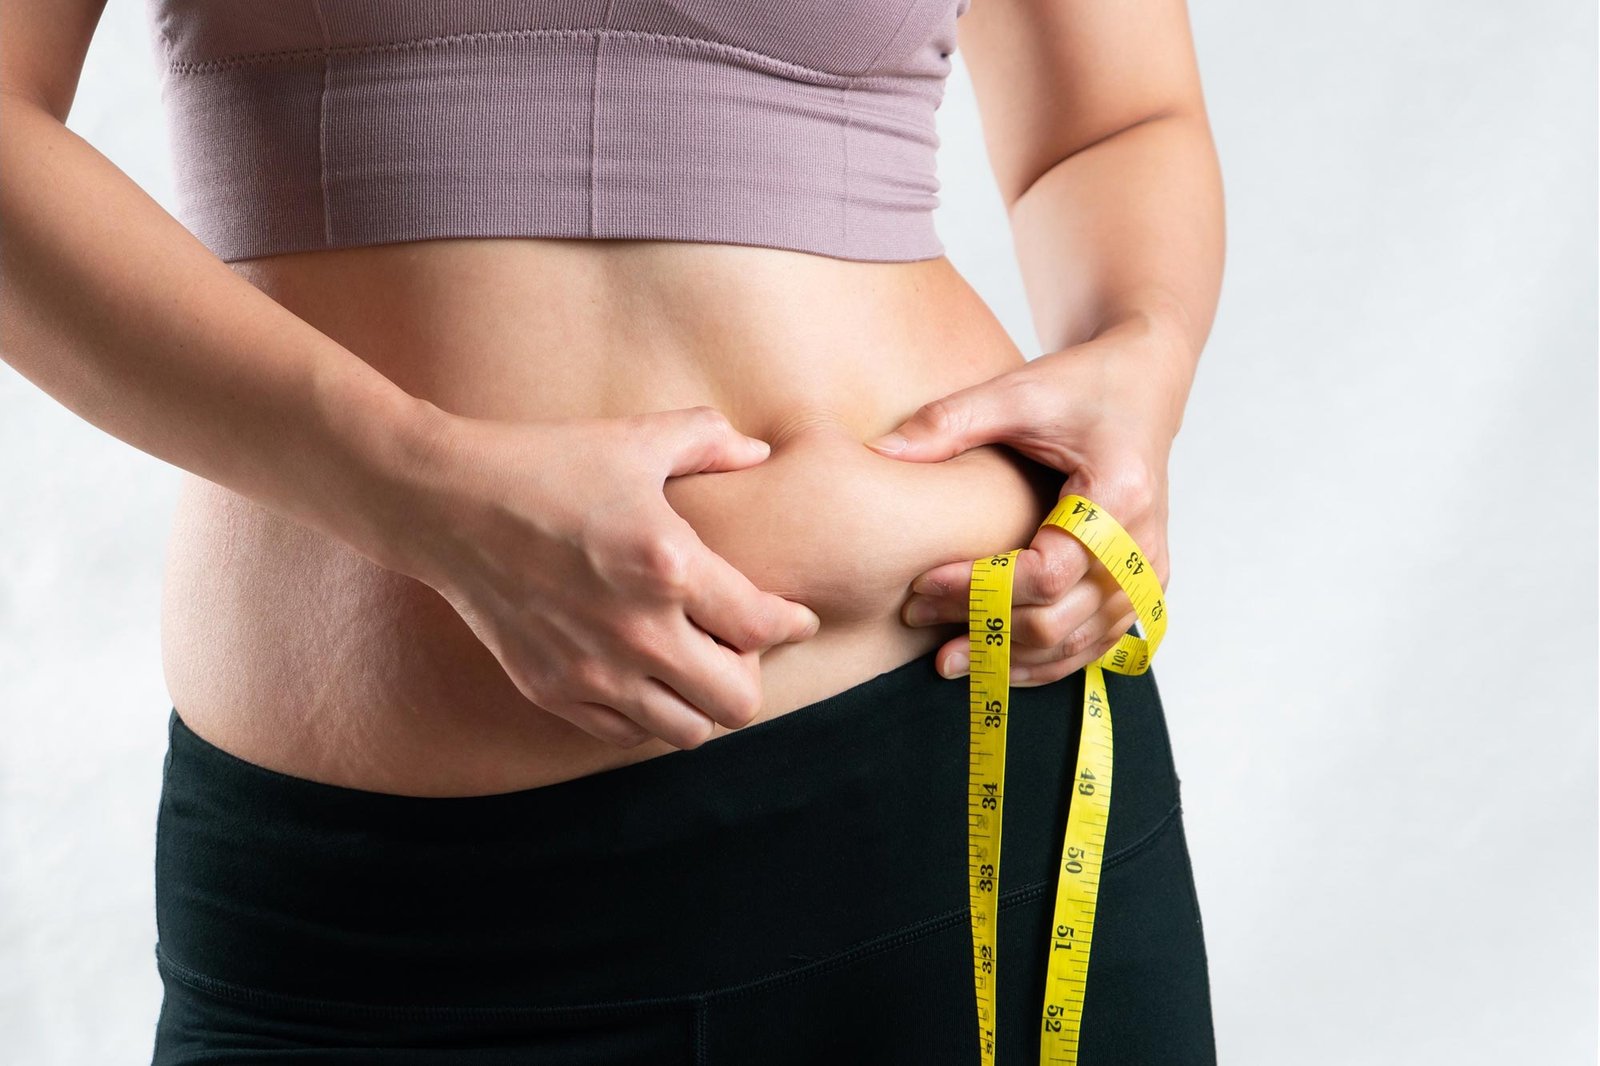 Largest Ever Obesity Study Showcases Semaglutide’s Promise